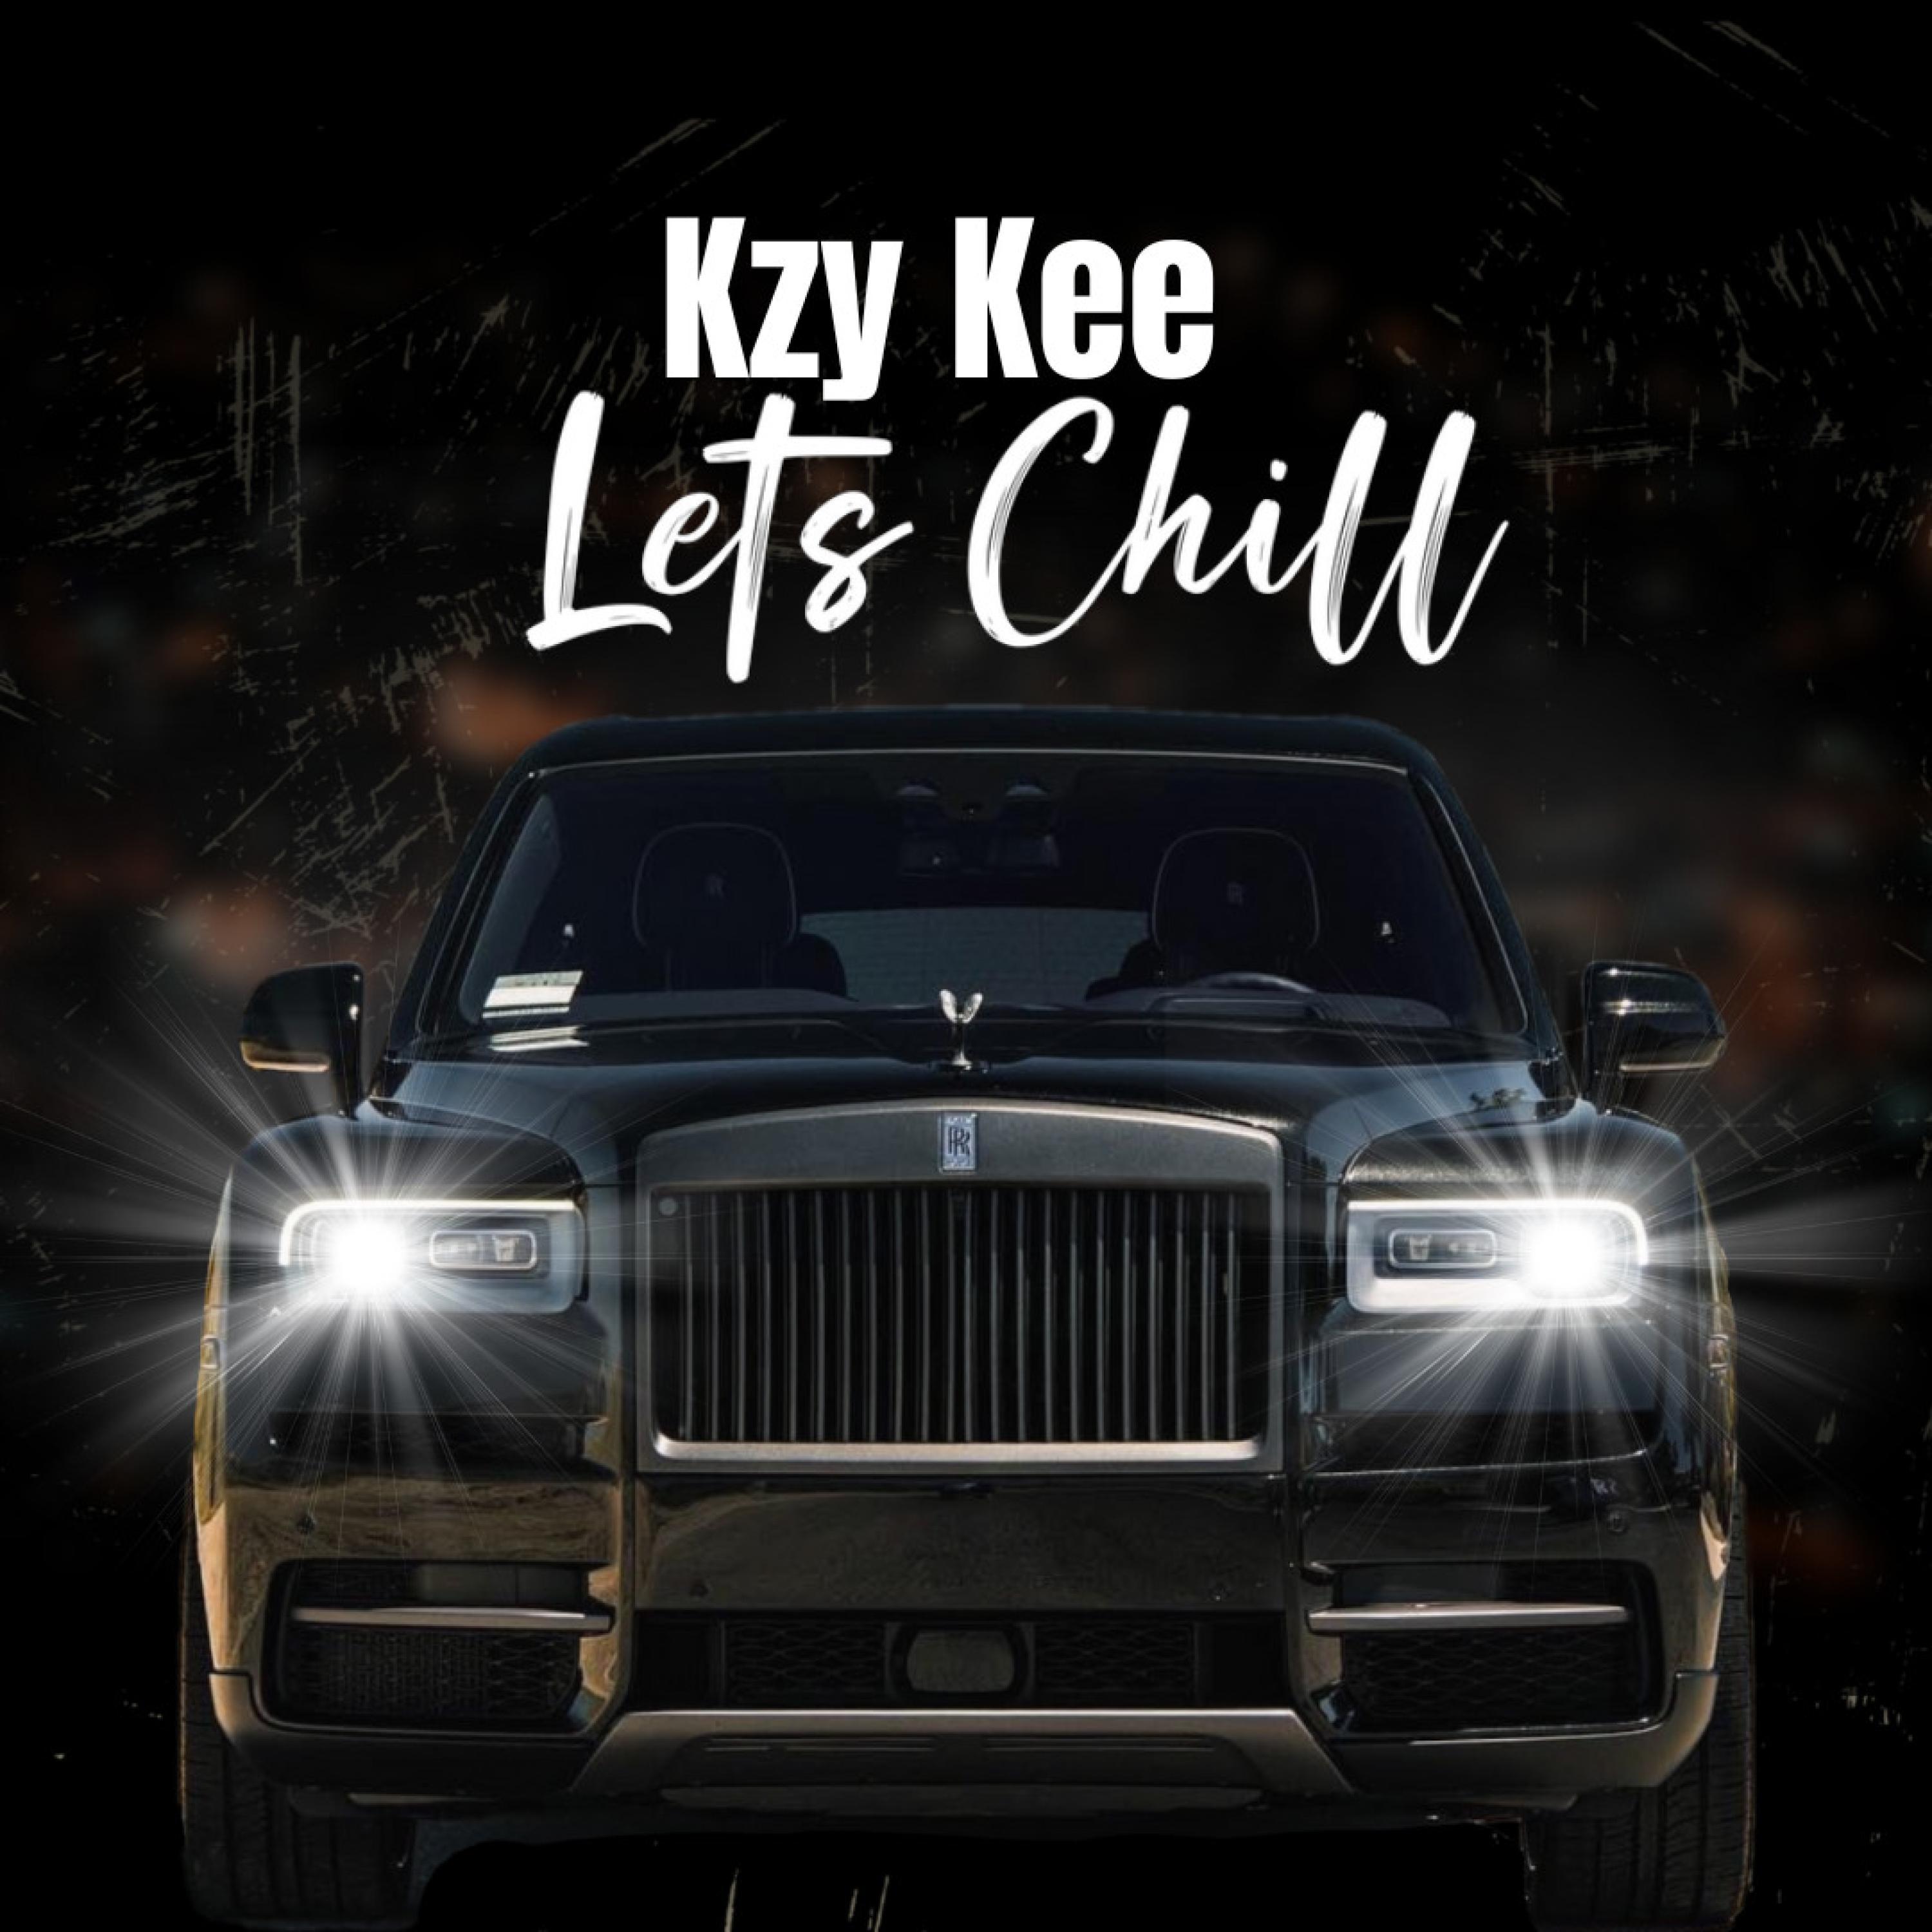 Kzy Kee - Let's Chill